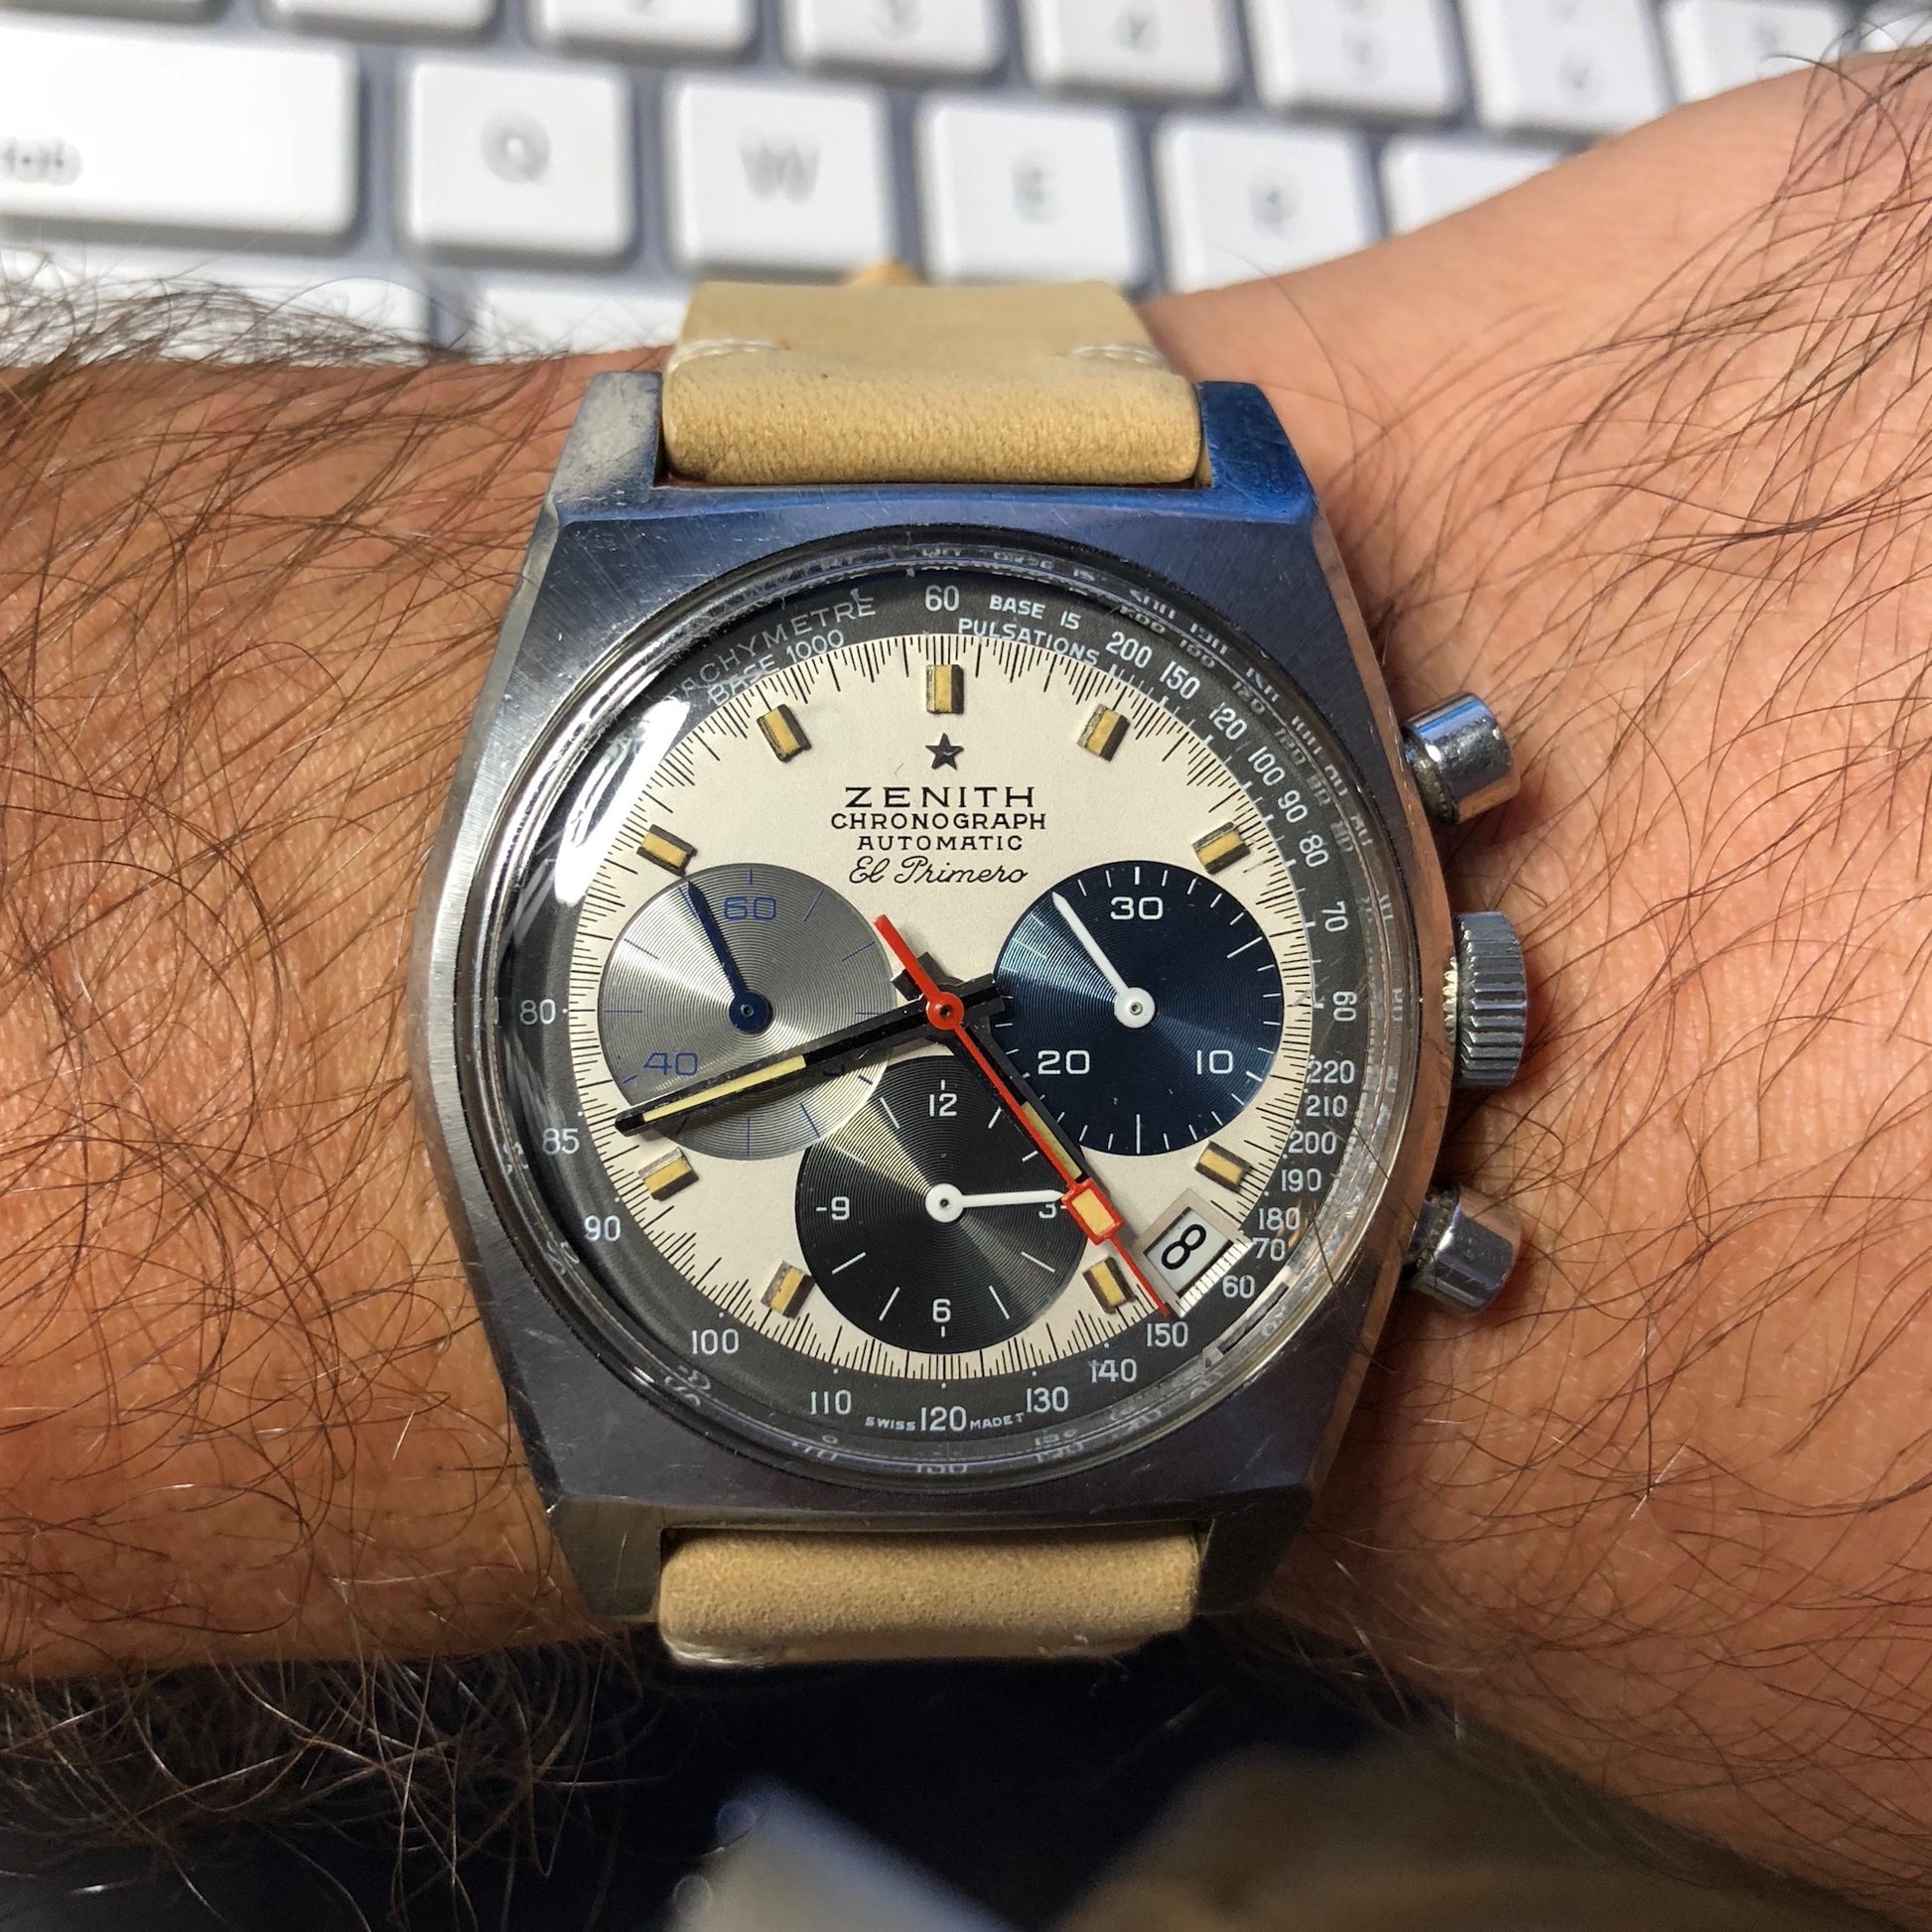 Vintage Zenith El Primero A3817 Stainless Steel Automatic Chronograph Wristwatch Circa 1971 - Hashtag Watch Company